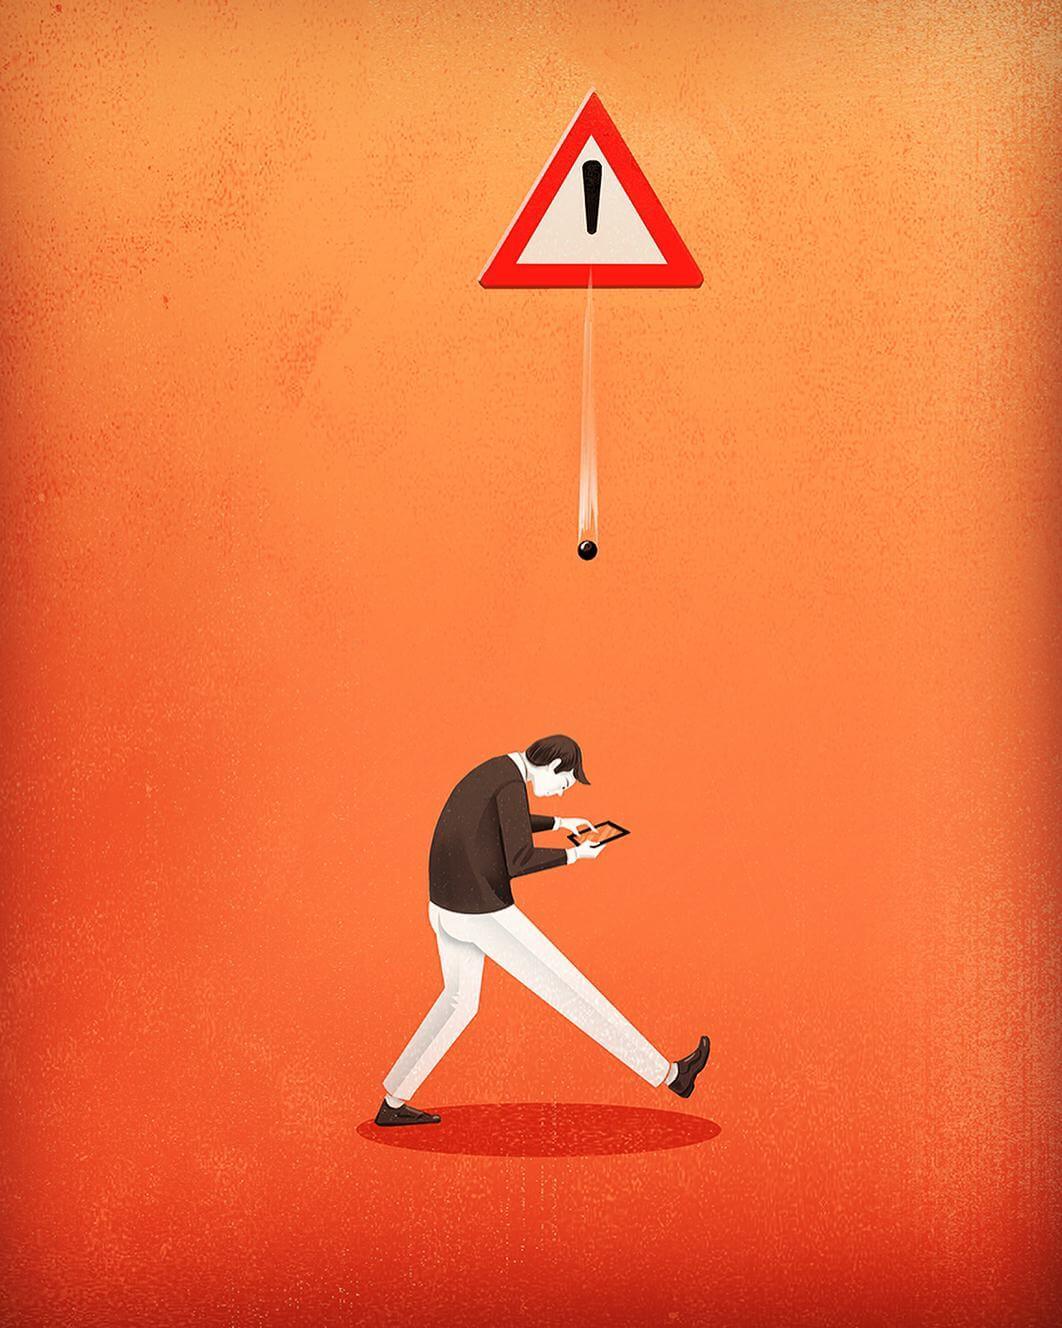 Intriguing Illustrations Depict The Harsh Truth About The Modern World